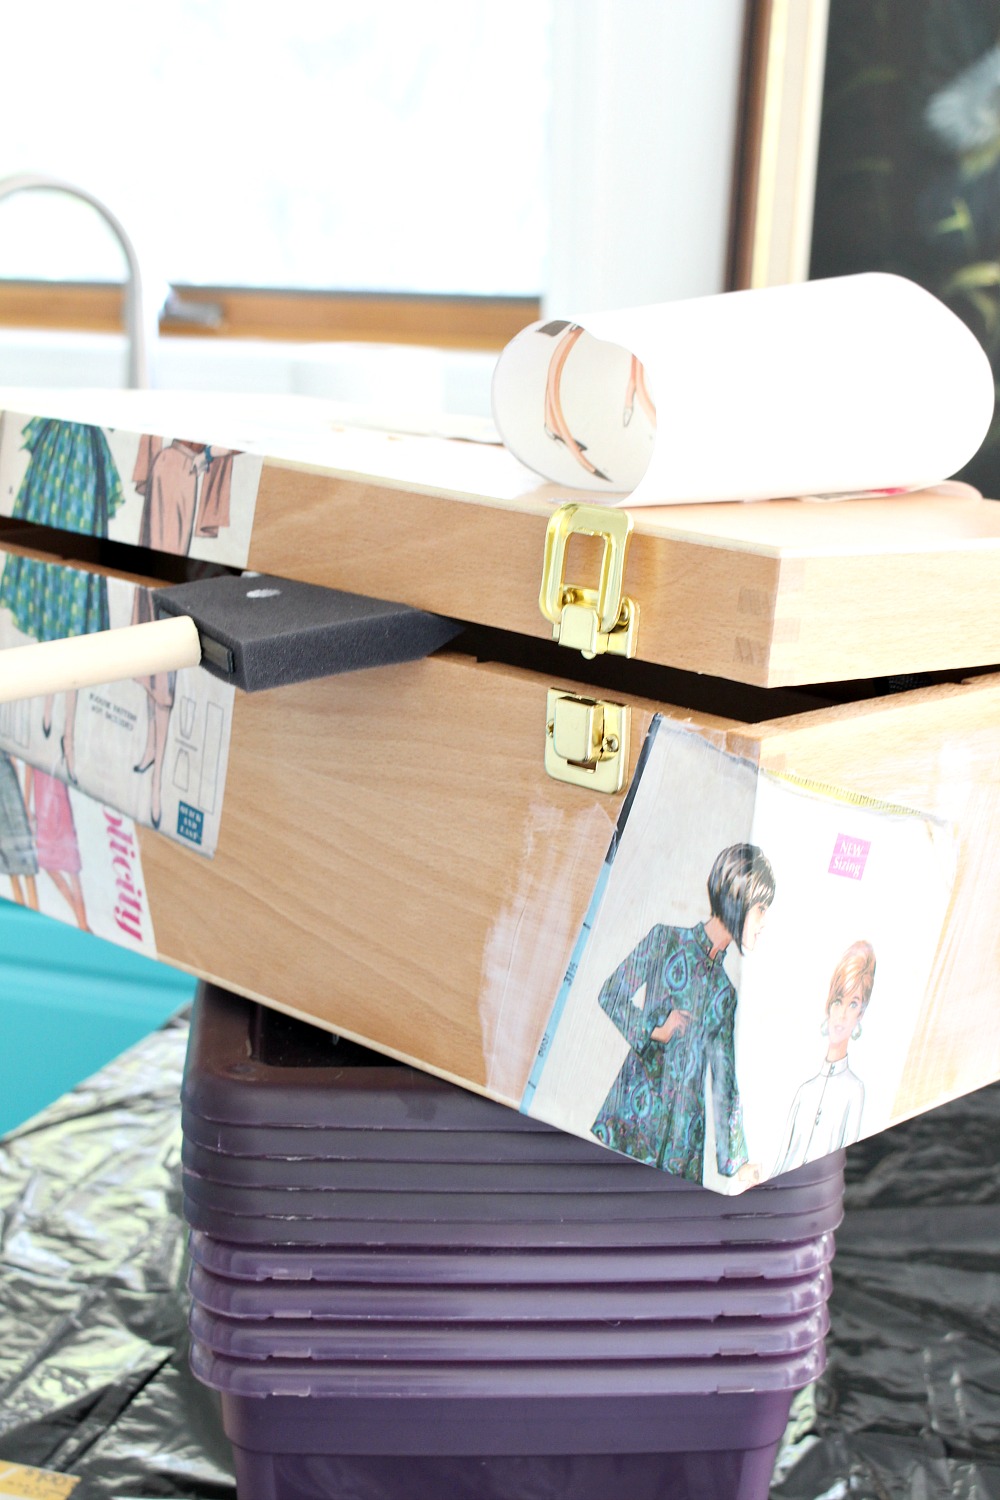 What To Do With Vintage Patterns: DIY Sewing Box Decoupage